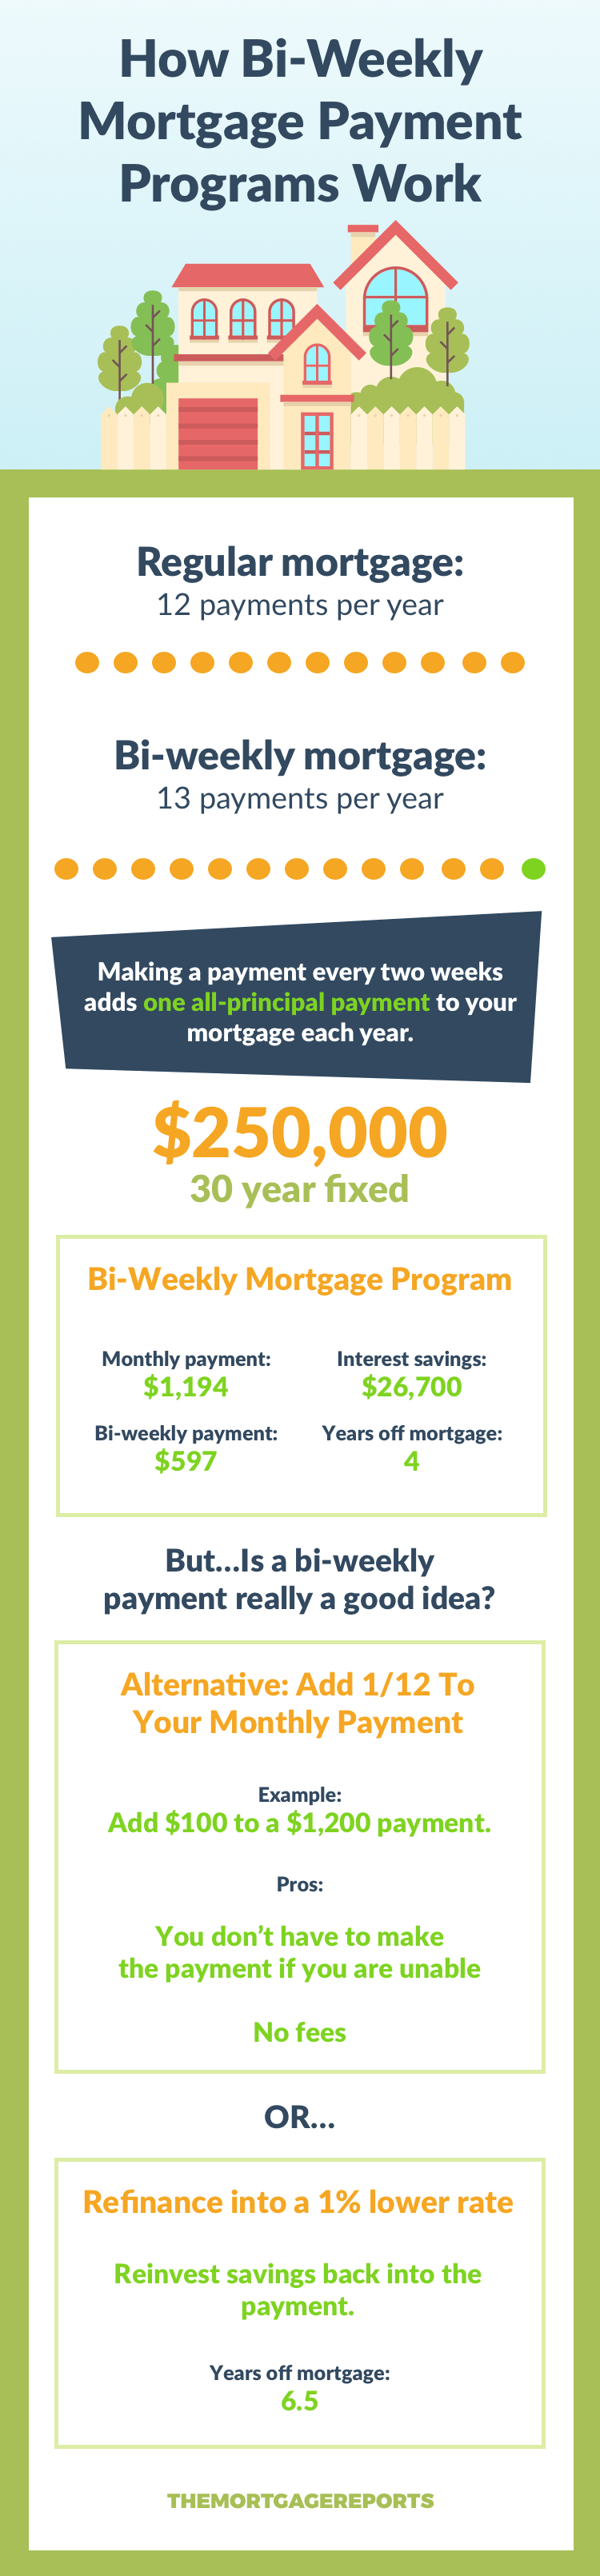 Bi-Weekly Mortgage Payment Infographic